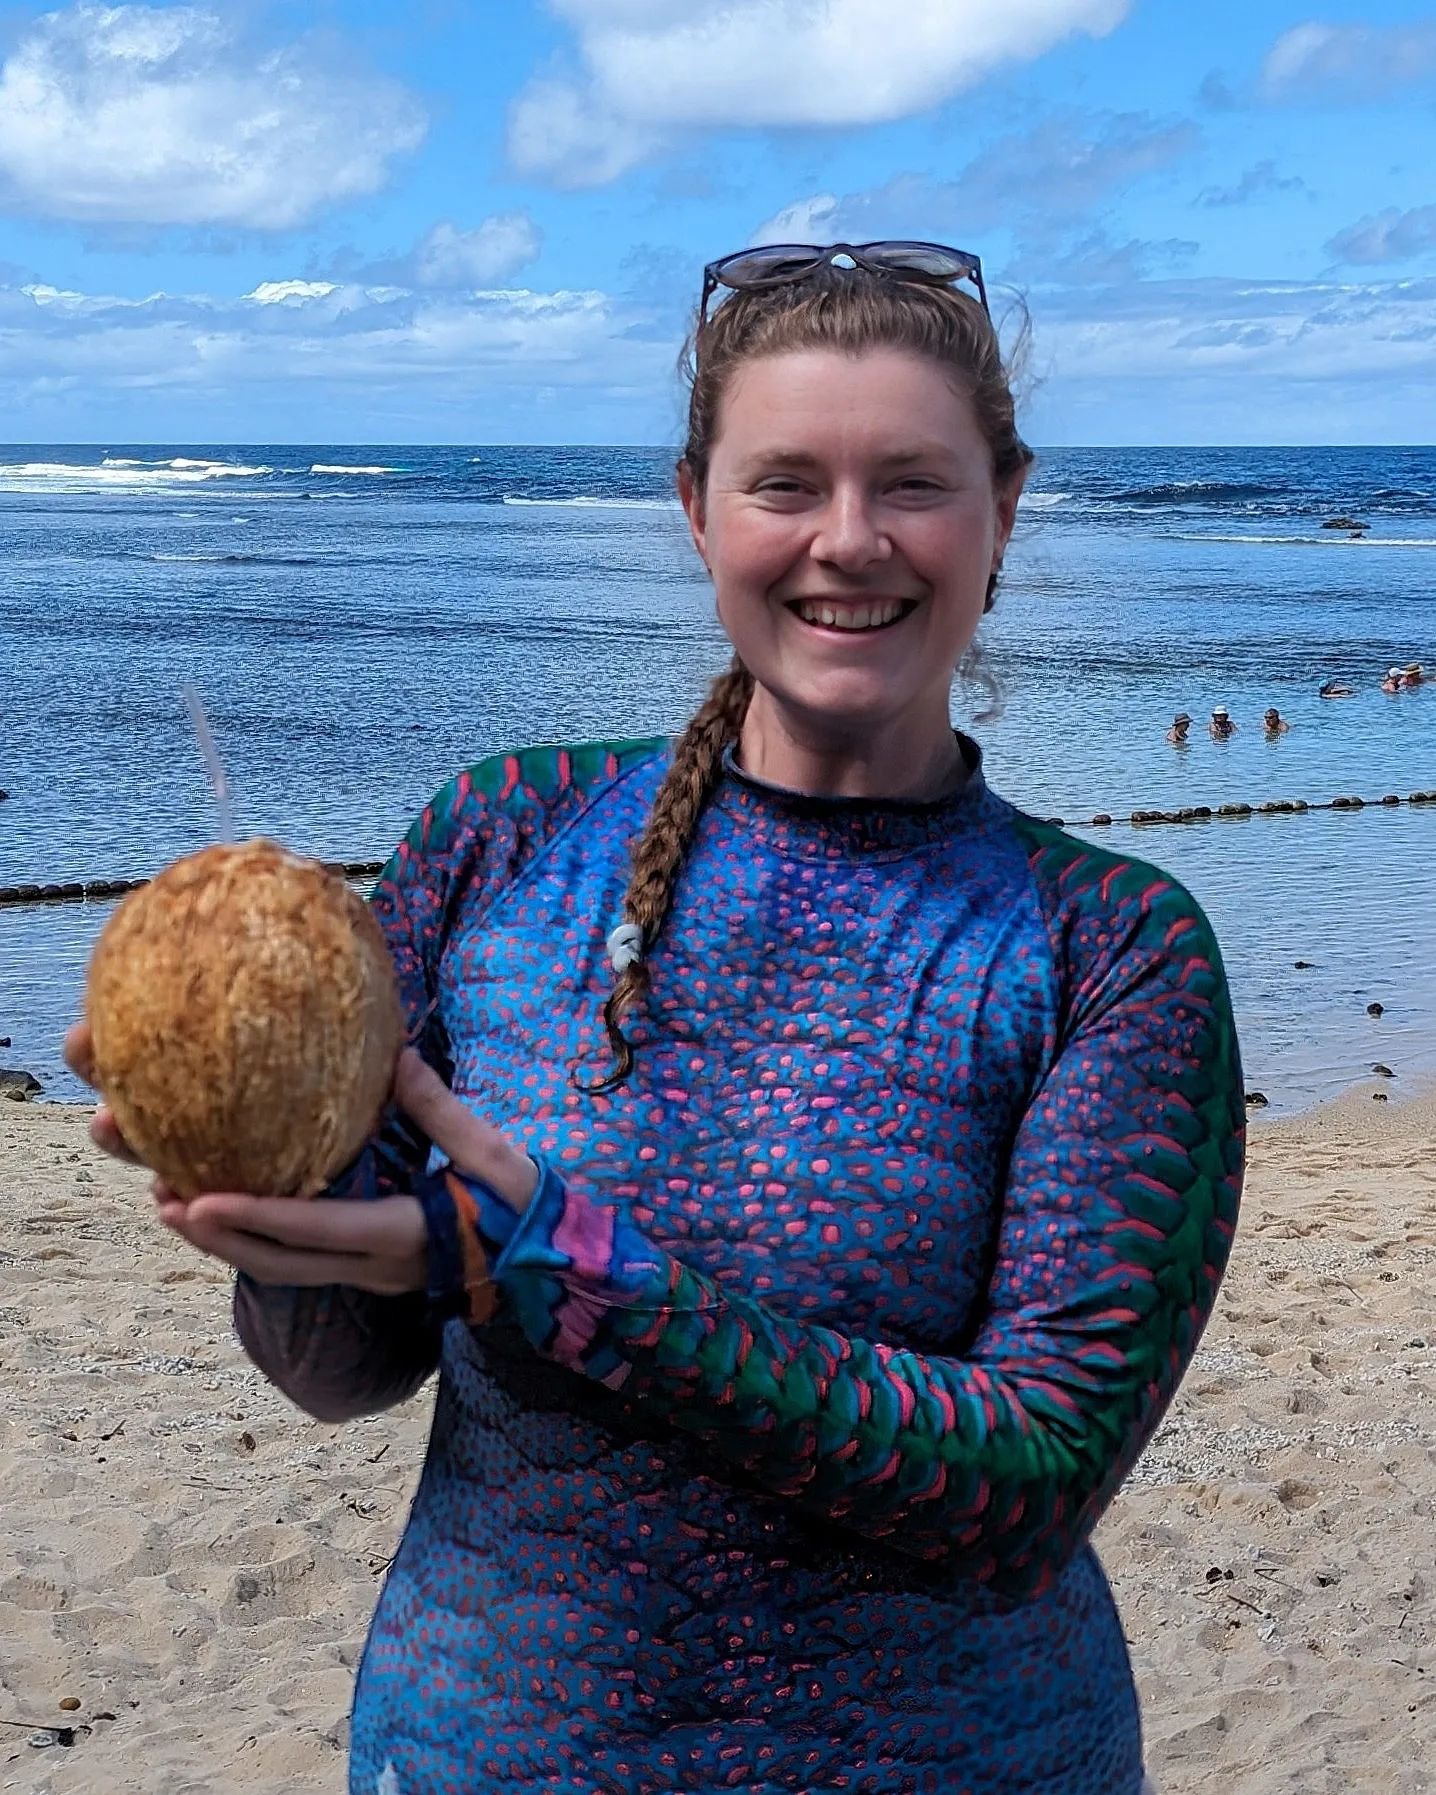 Celebratory coconut!

What am I celebrating? Oh just some of the most lovely tropical days from Australia to Samoa! Also in all that time I never even got a touch of sunburn!!! Which is something truly worth the celebration! 

@waterlust #waterlust #